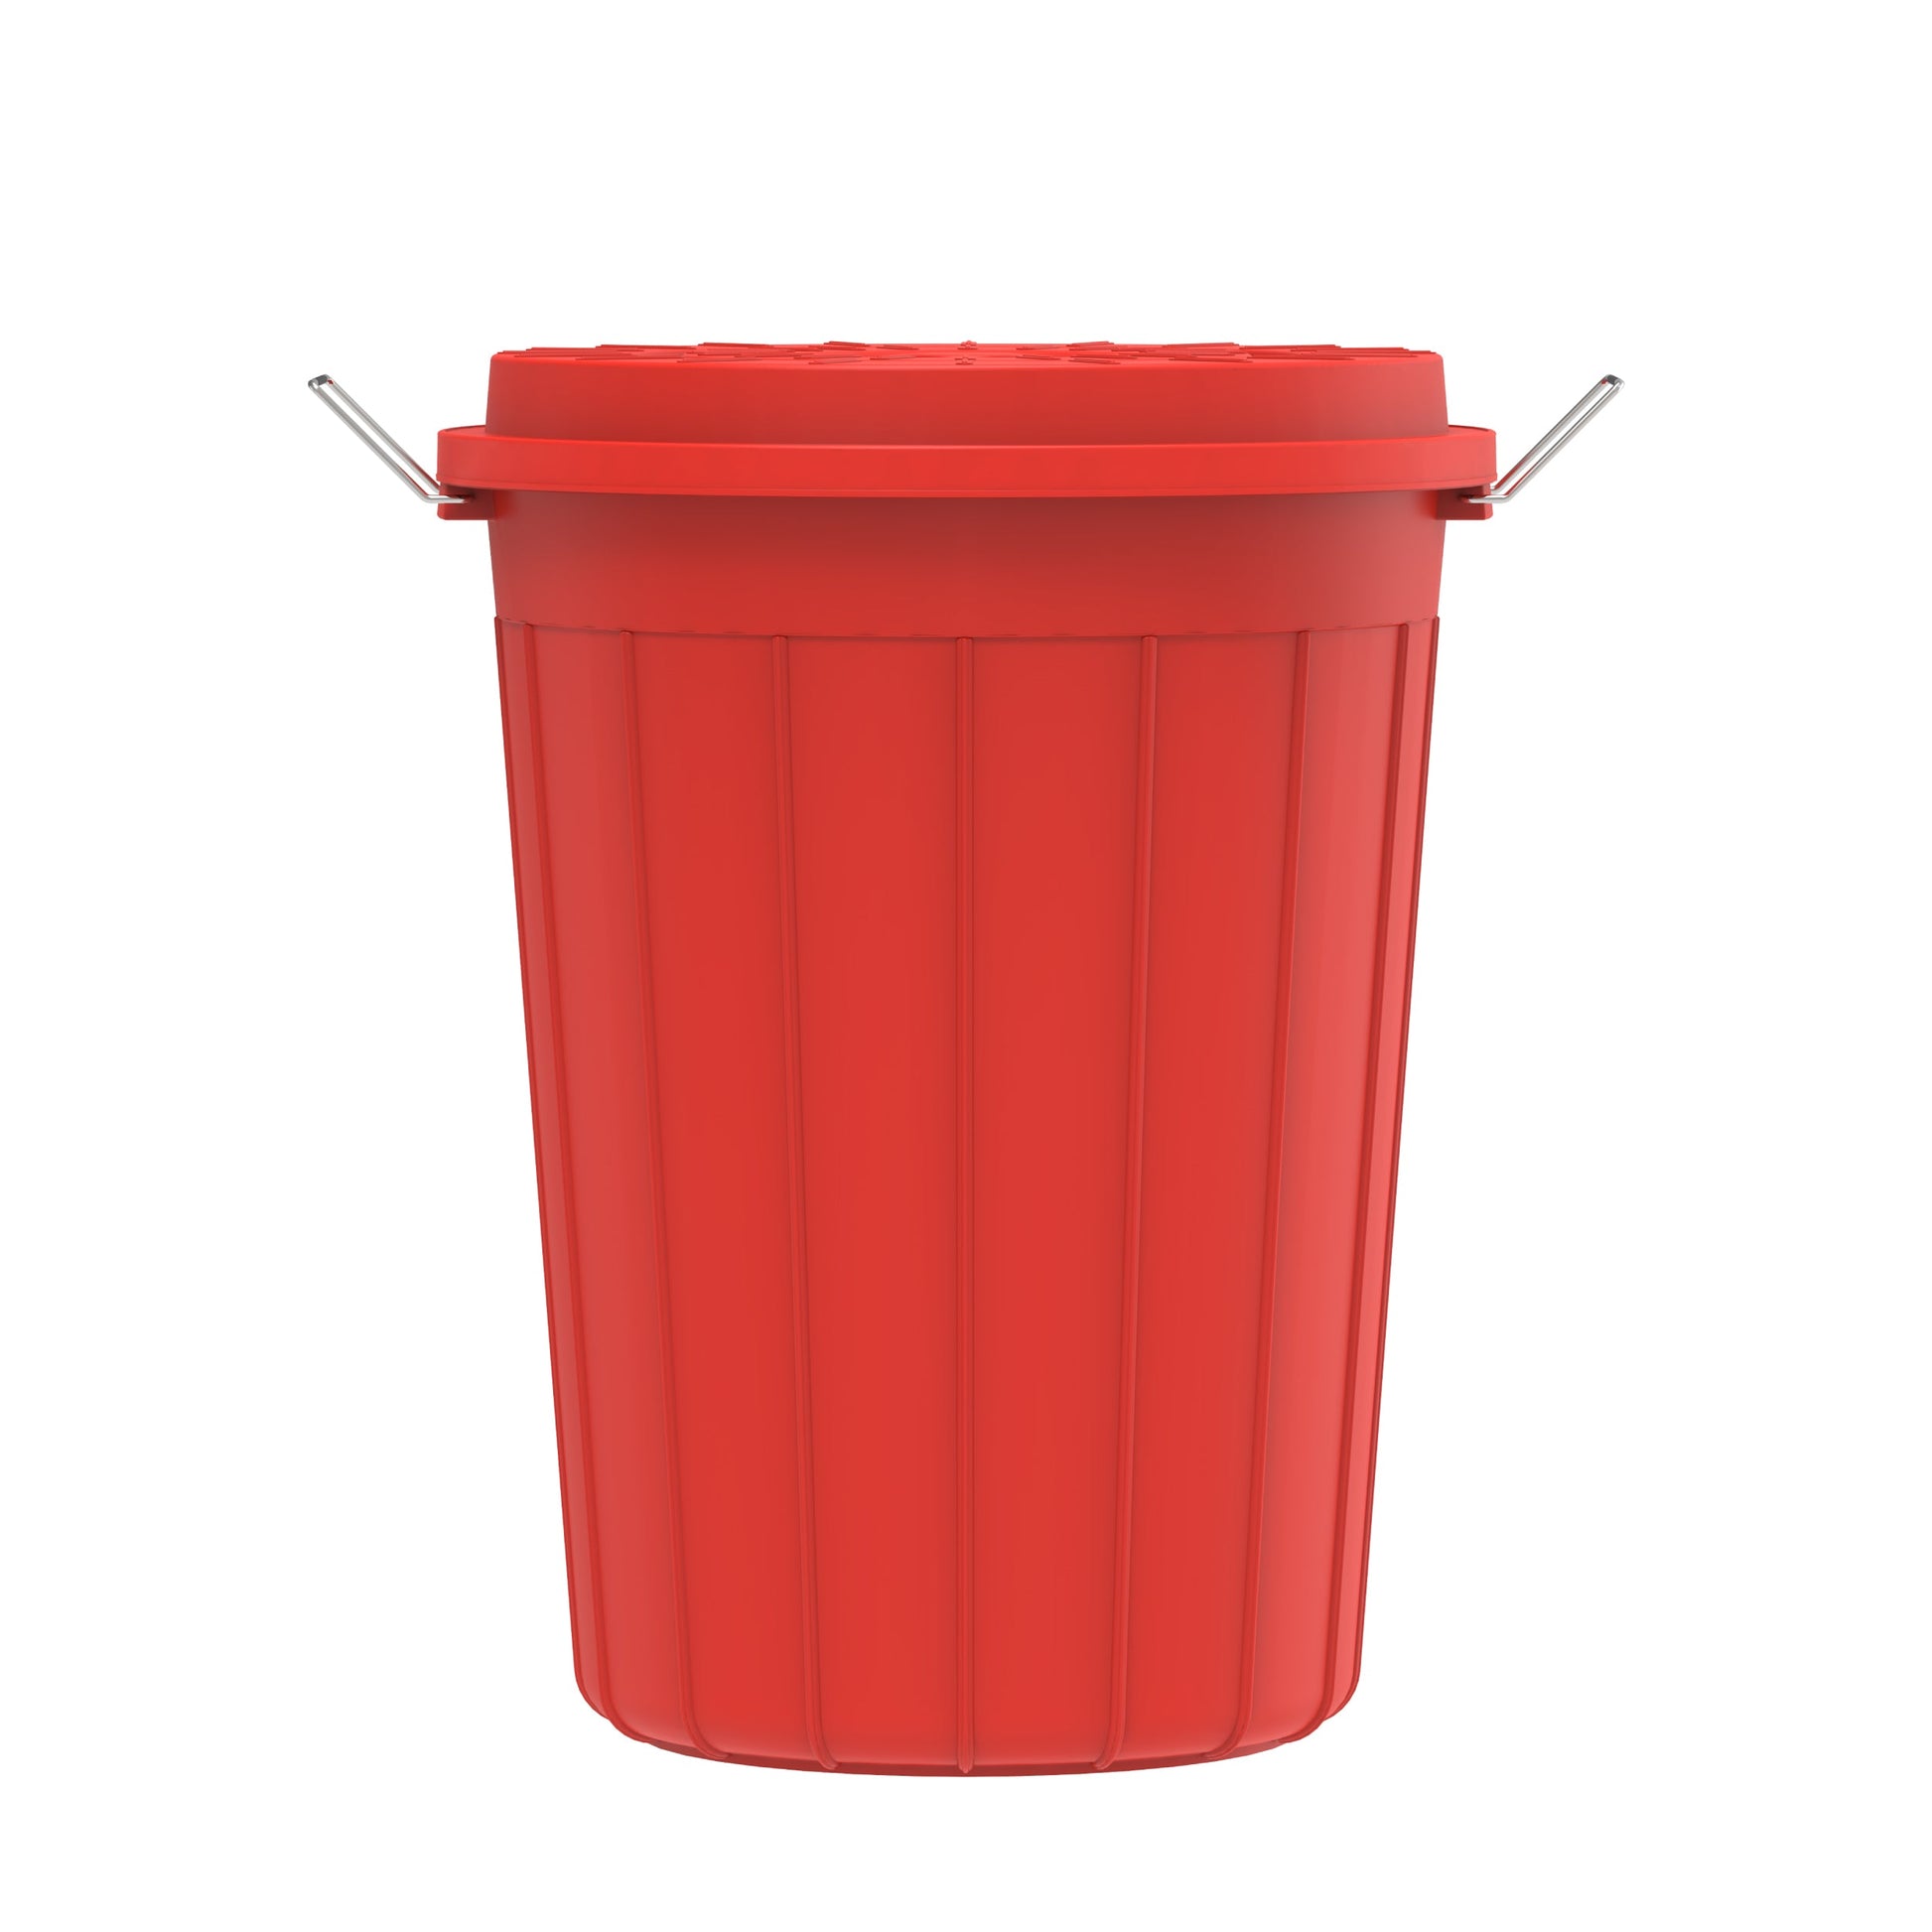 100L Round Plastic Drums with Lid - Cosmoplast Bahrain